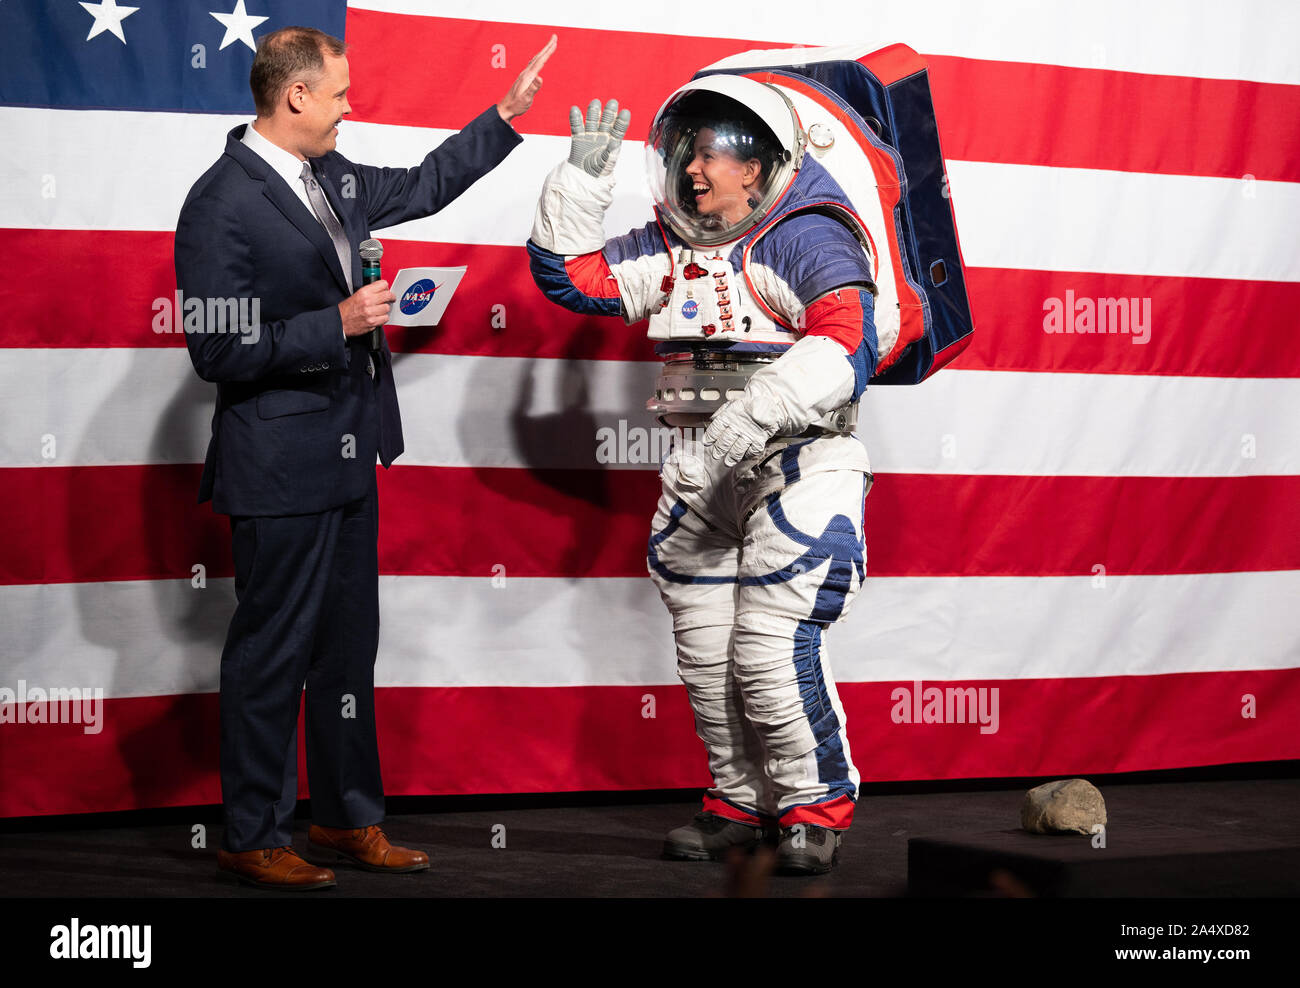 NASA Administrator Jim Bridenstine, left, high fives Kristine Davis, a spacesuit engineer at NASA's Johnson Space Center, wearing a ground prototype of NASA's new Exploration Extravehicular Mobility Unit (xEMU), during a demonstration of the suit, on October 15, 2019, at NASA Headquarters in Washington. The xEMU suit improves on the suits previous worn on the Moon during the Apollo era and those currently in use for spacewalks outside the International Space Station and will be worn by first woman and next man as they explore the Moon as part of the agency's Artemis program. NASA Photo by Joe Stock Photo